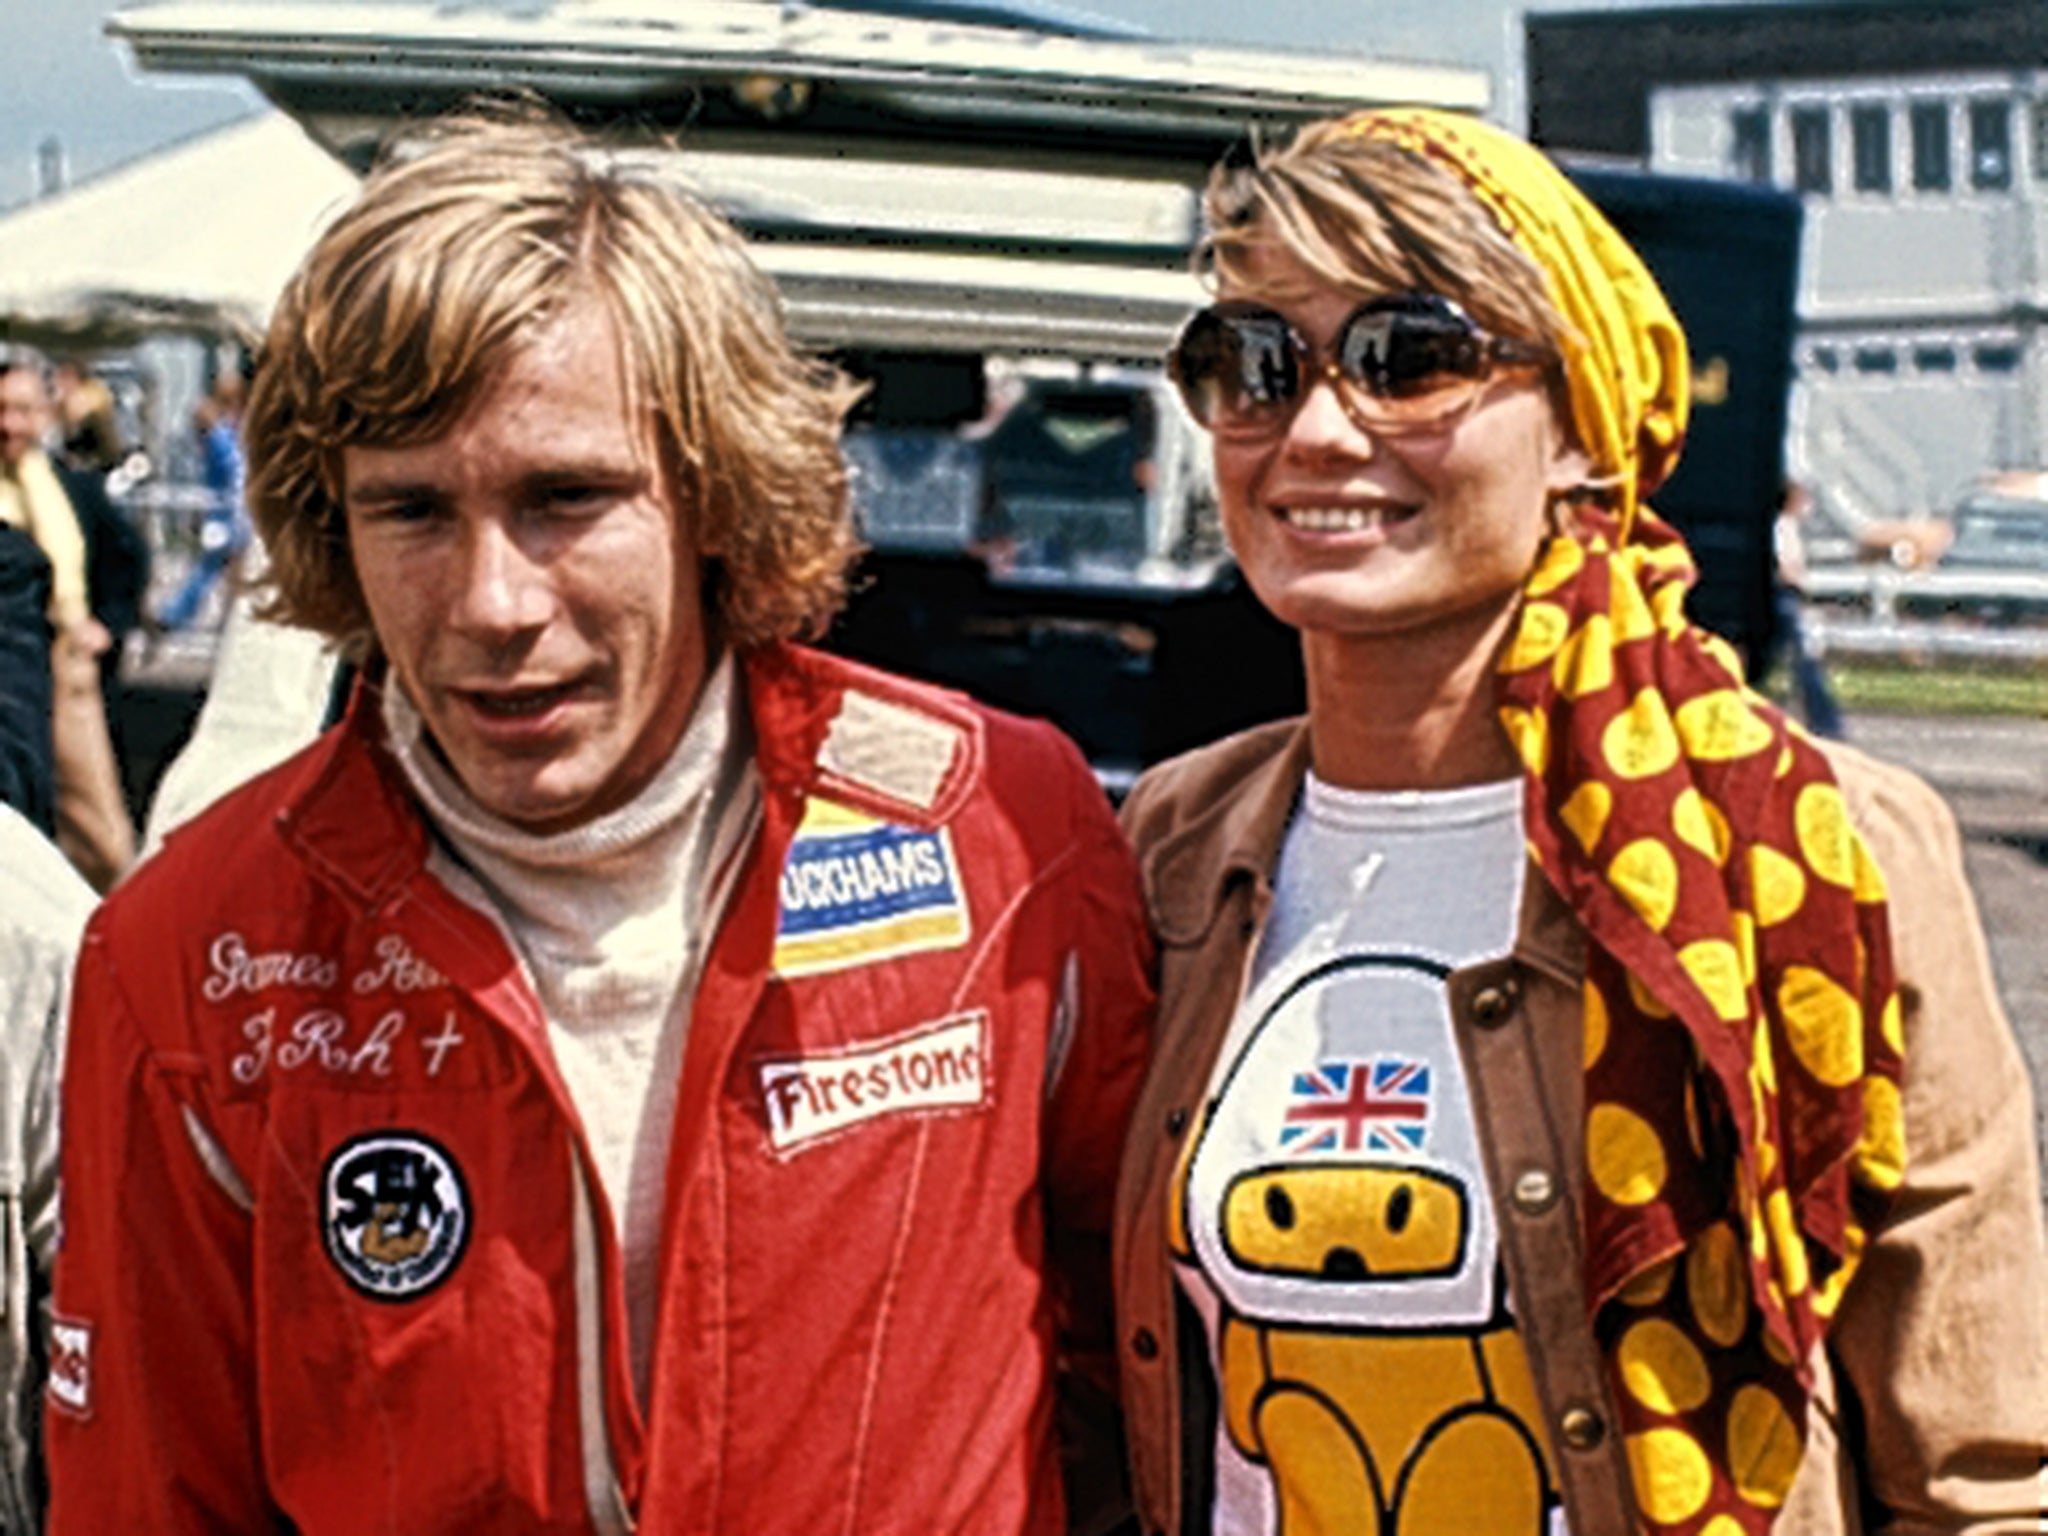 Even the 1976 world champion James Hunt might seem less of a character in today’s F1